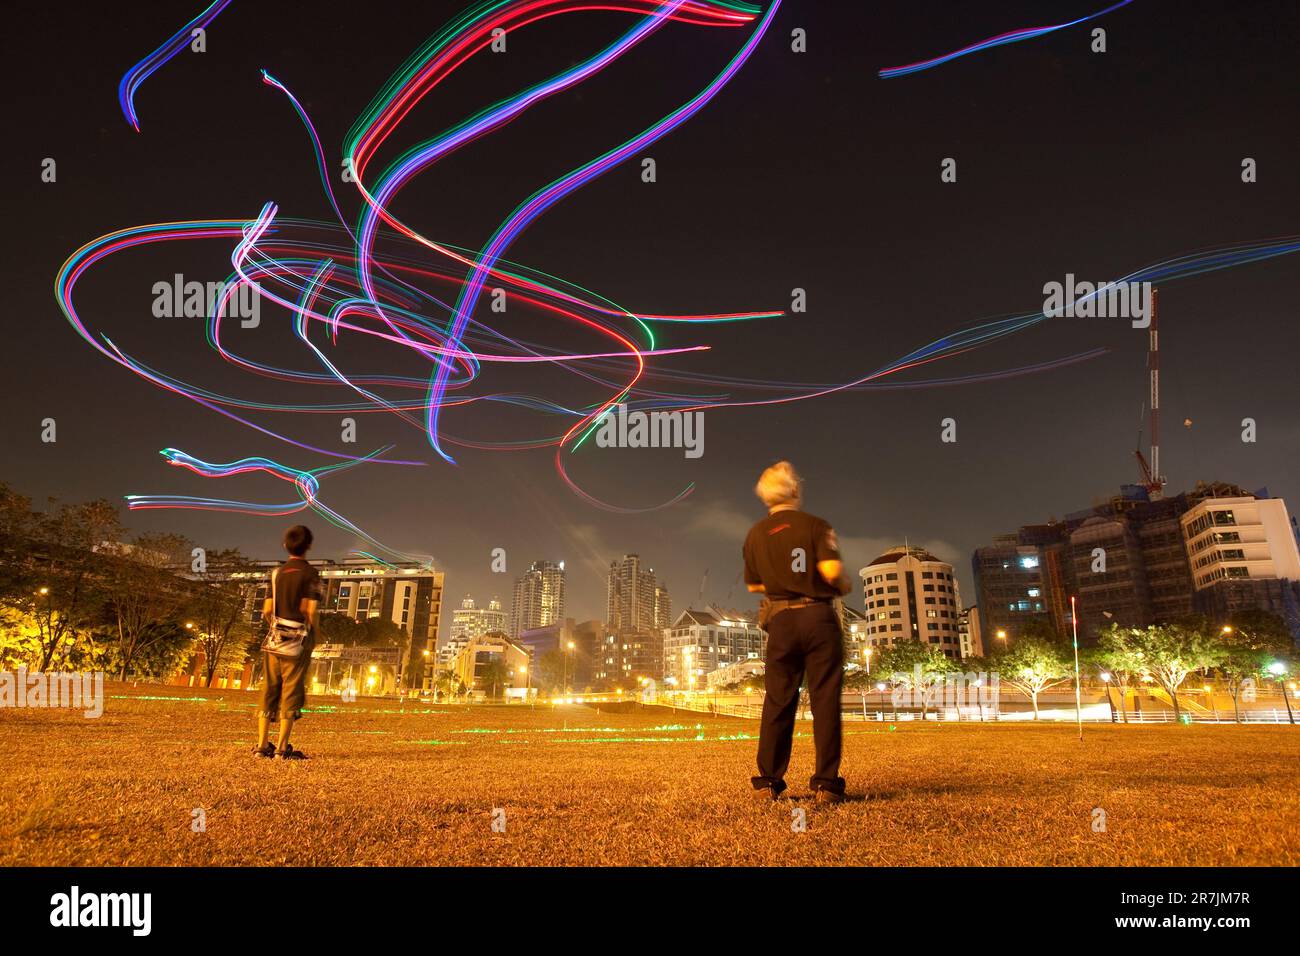 Members of the Singapore Night Flyer Kite club light up the evening sky with remote controlled kites adorned with colorful LED lighting. Stock Photo